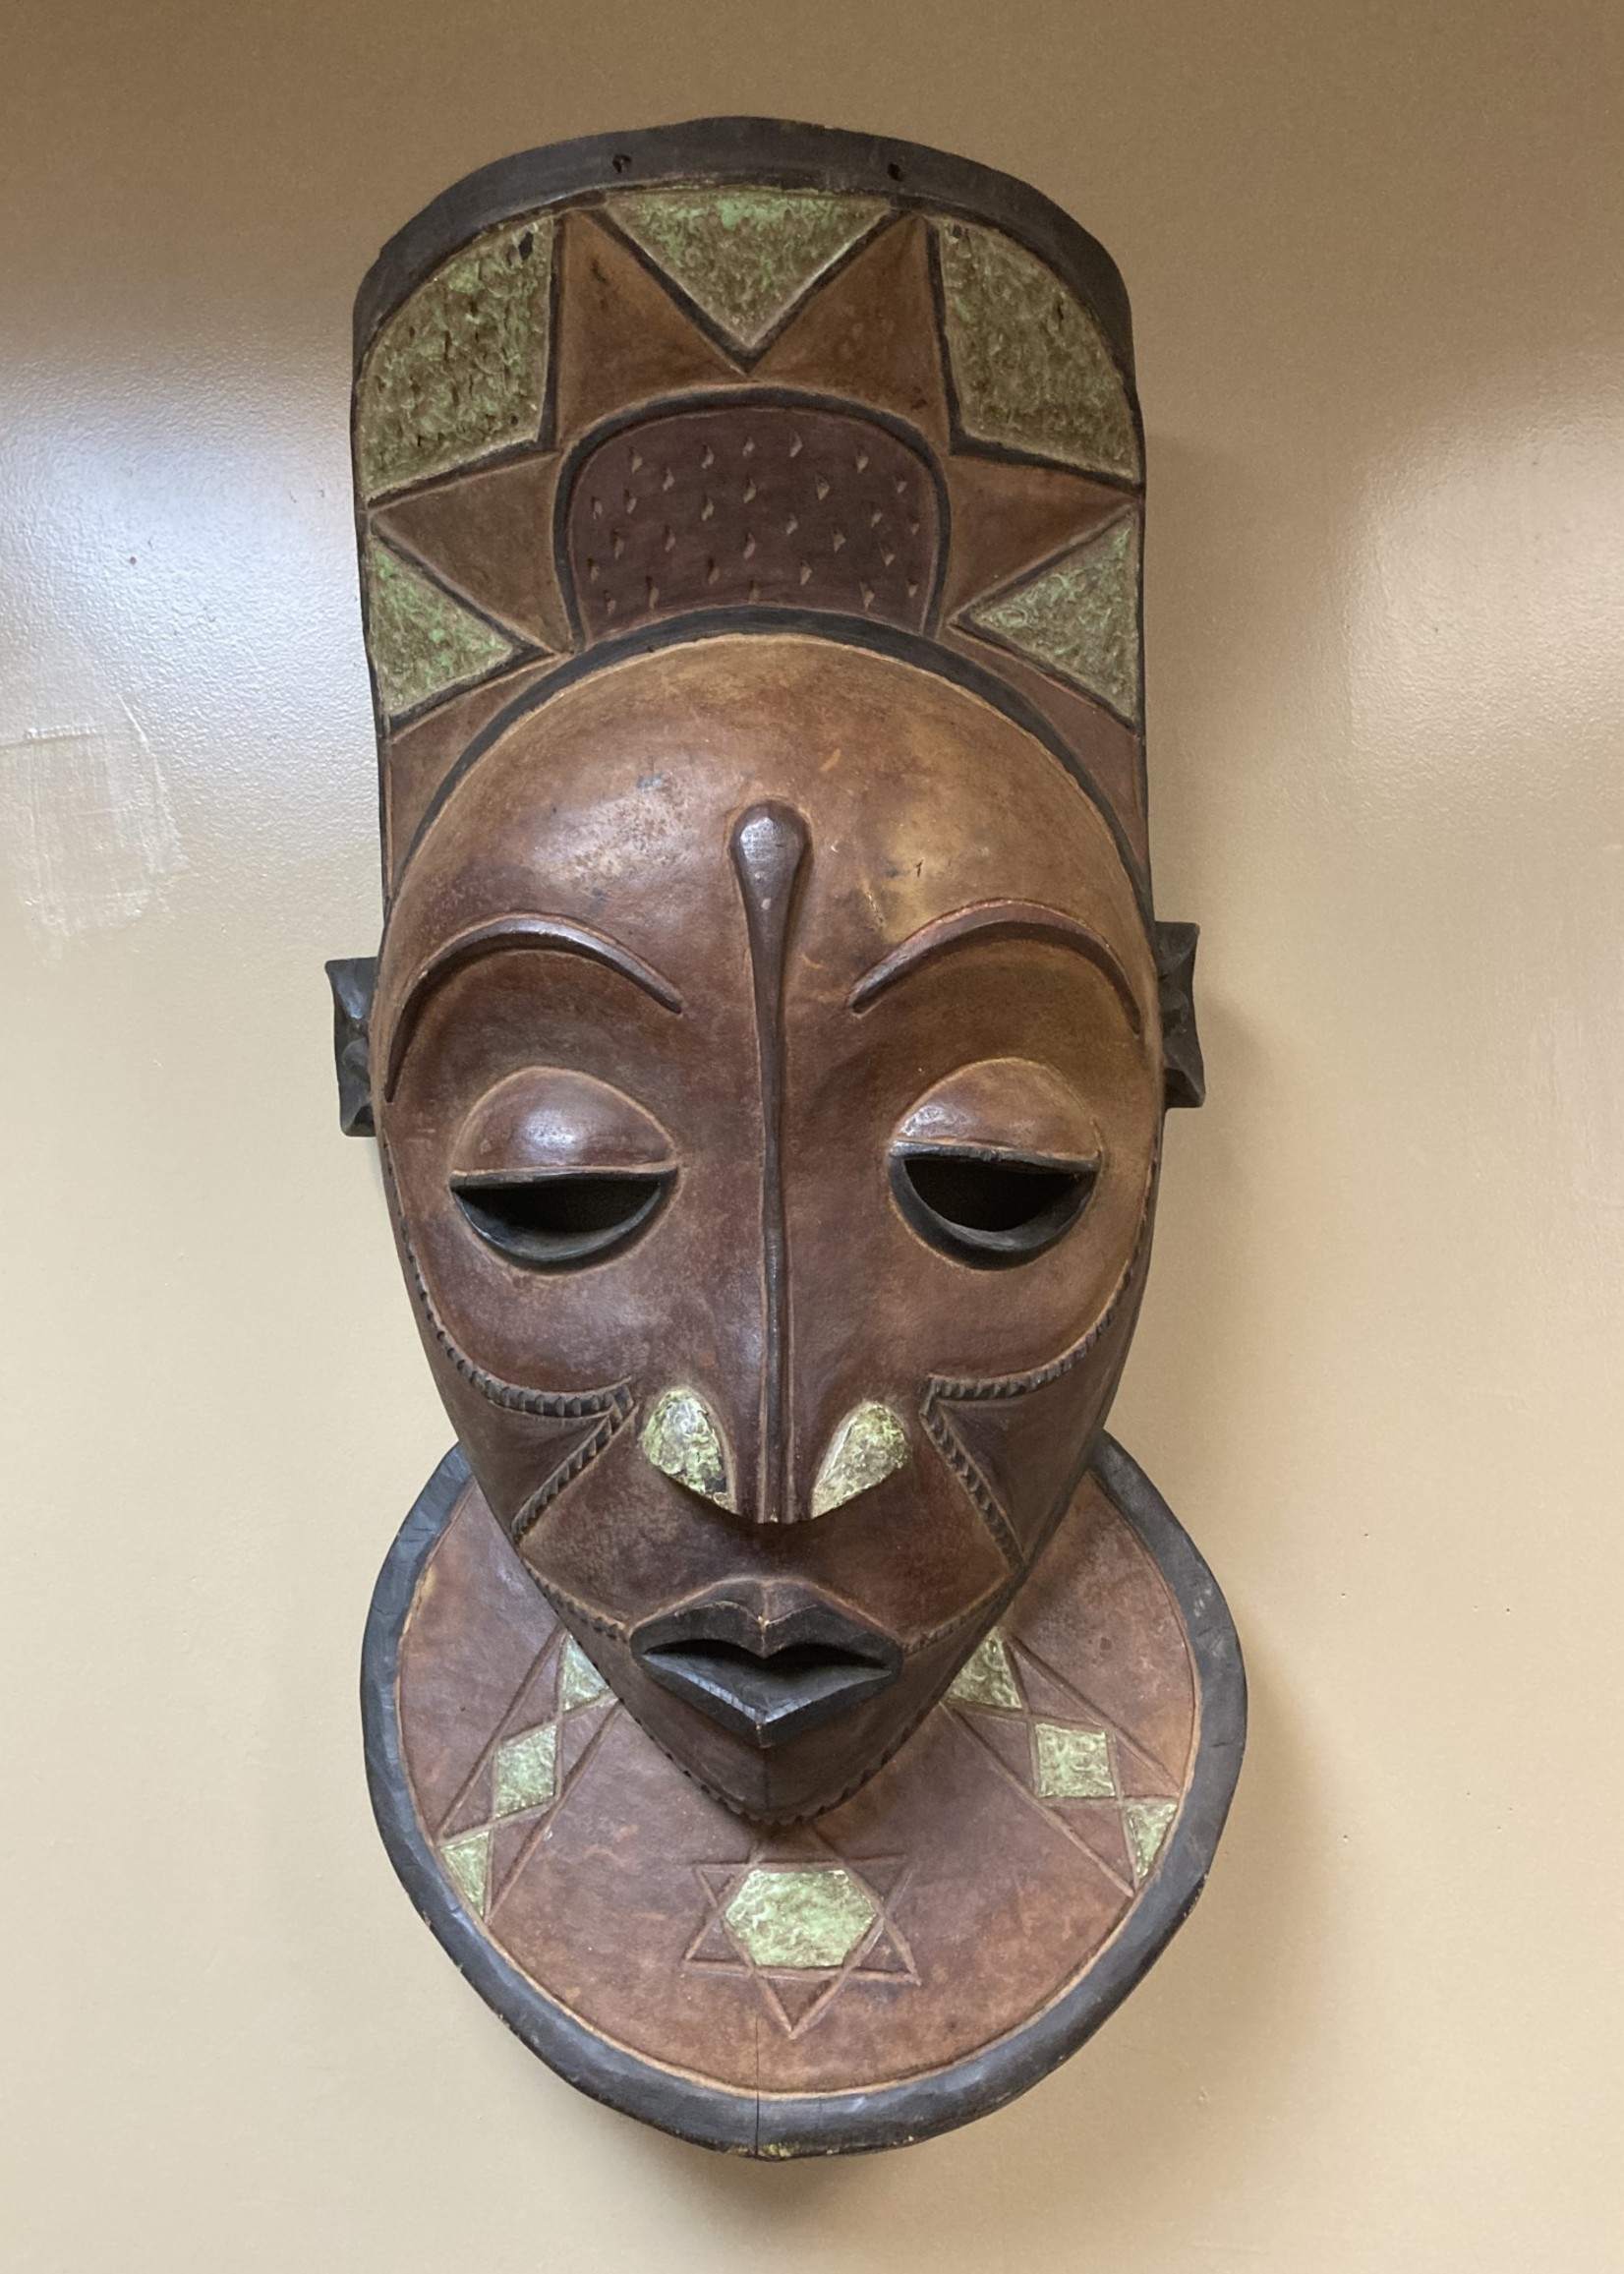 Pende Pende X-Large Mask: The Bapende are found in Dem Rep of Congo. This mask is 35 ½” tall and 16 ½” wide. Masks this size often decorated a meeting house. Wooden